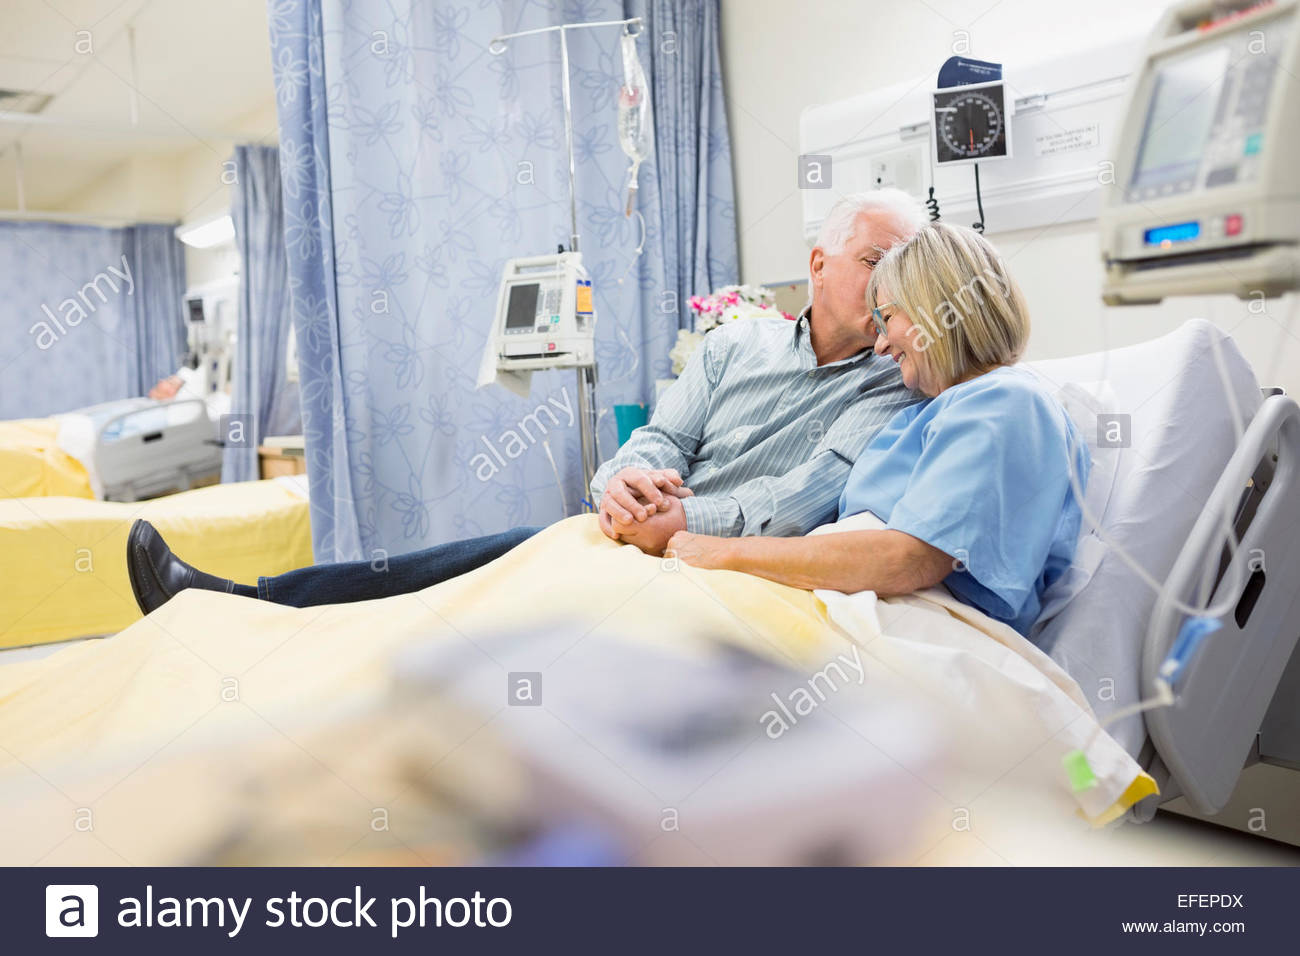 Husband comforting wife in hospital bed Stock Photo